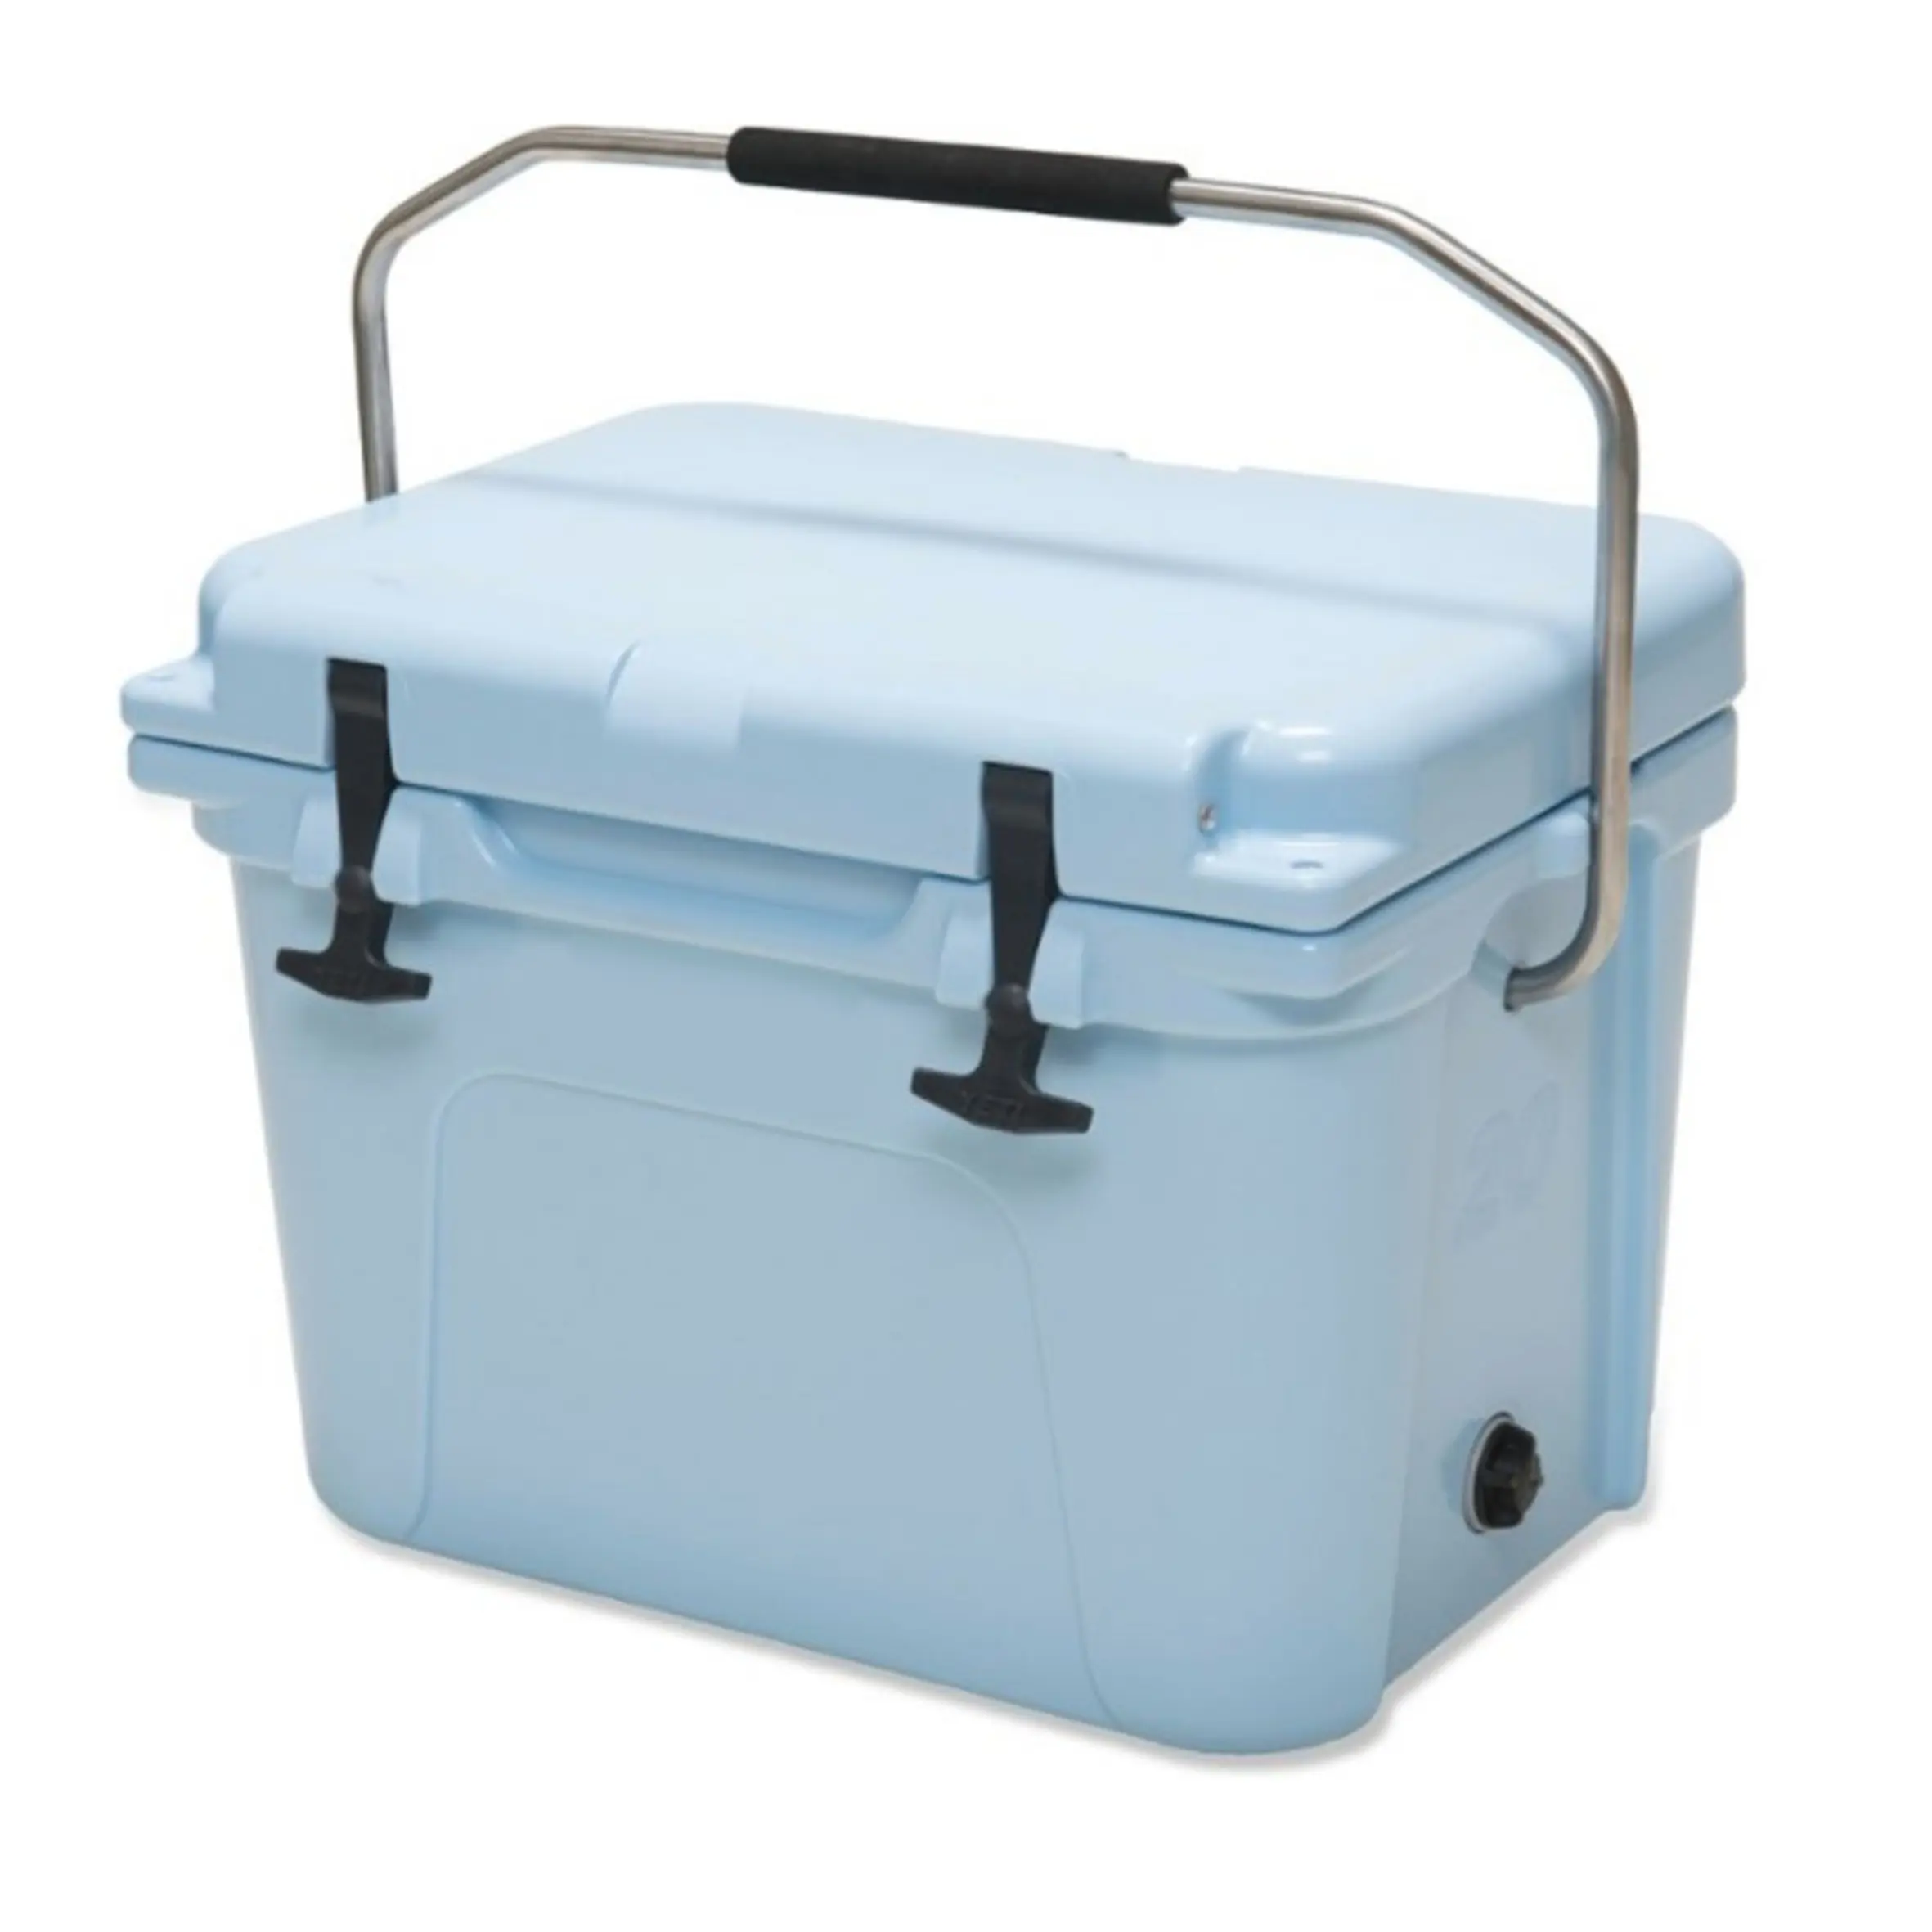 High-Quality Picnic Cooler Box and Cooler Set